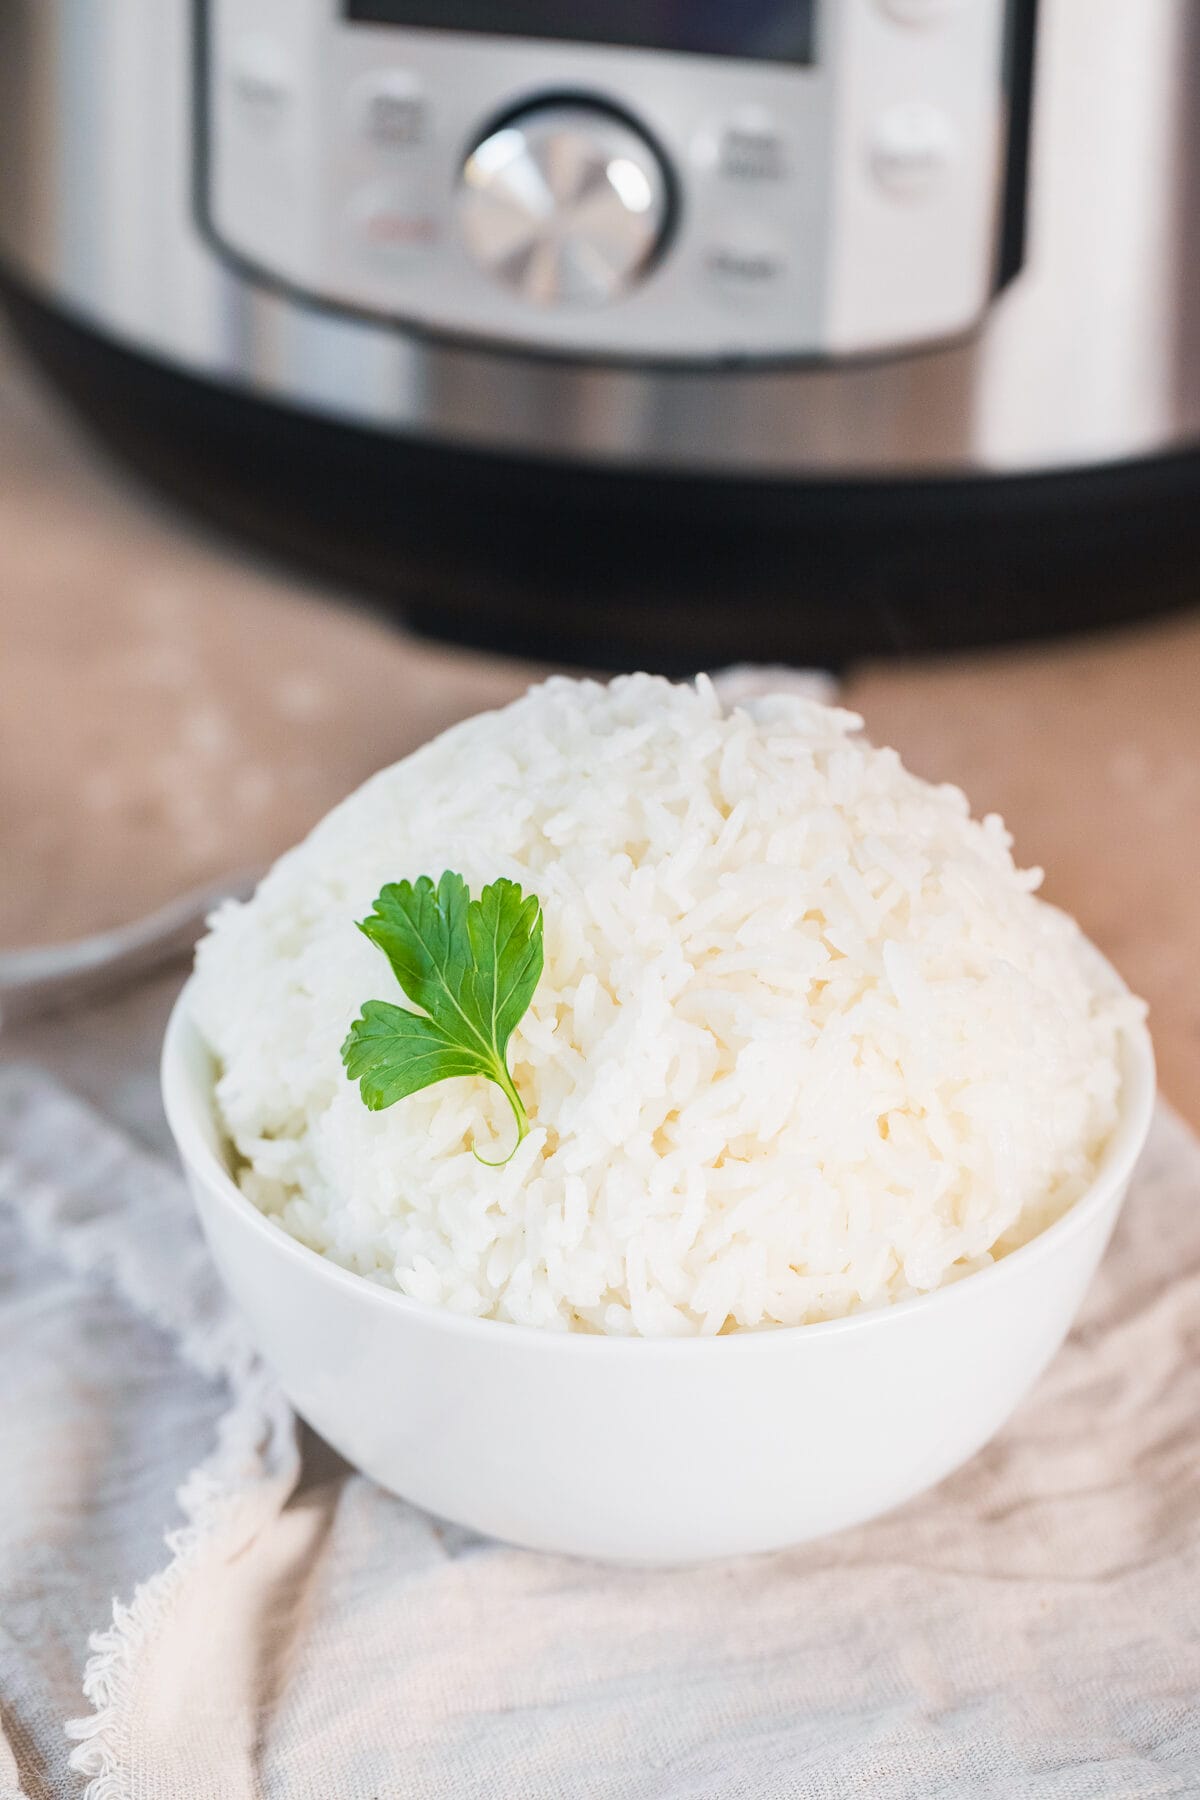 cooked instant pot jasmine rice in a white bowl with a piece of parsley as garnish on a beige napkin in front of an instant pot.